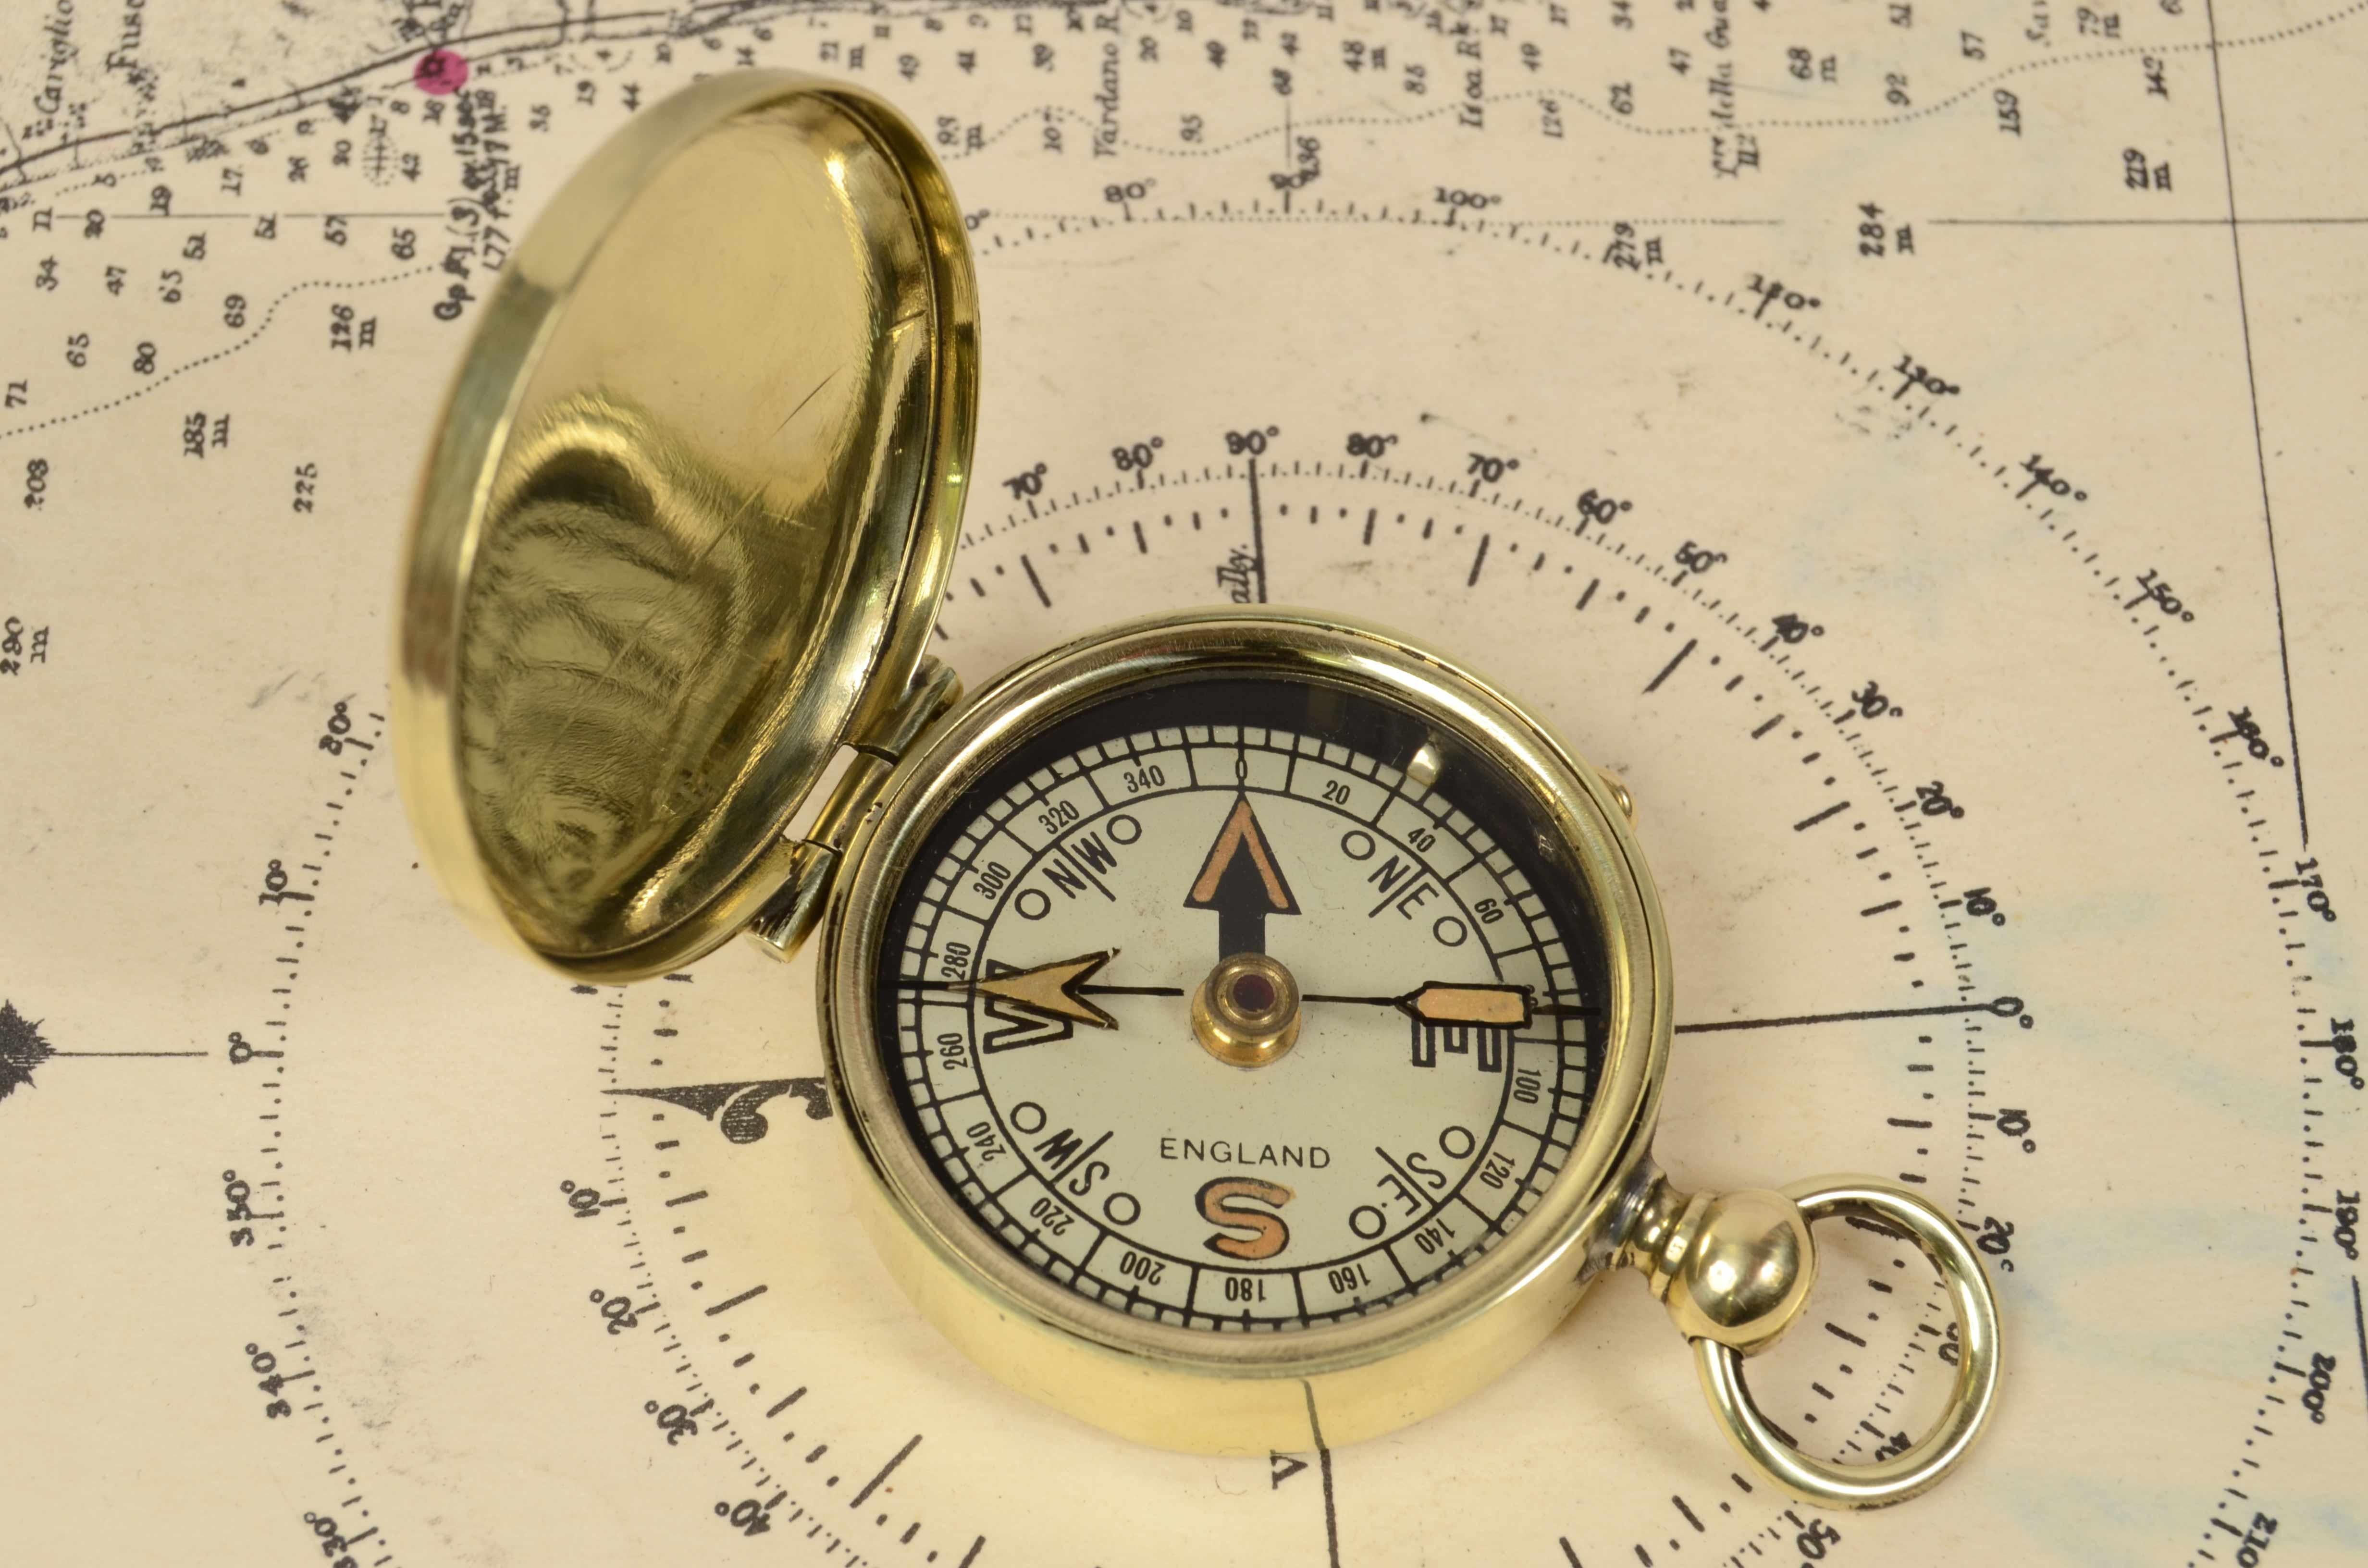 Nautical pocket compass made of turned brass, 1920s English manufacture. 
The compass is complete with cover, compass card lock and chain ring. 
Eight winds compass card on paper complete with goniometric circle. 
In excellent condition, fully